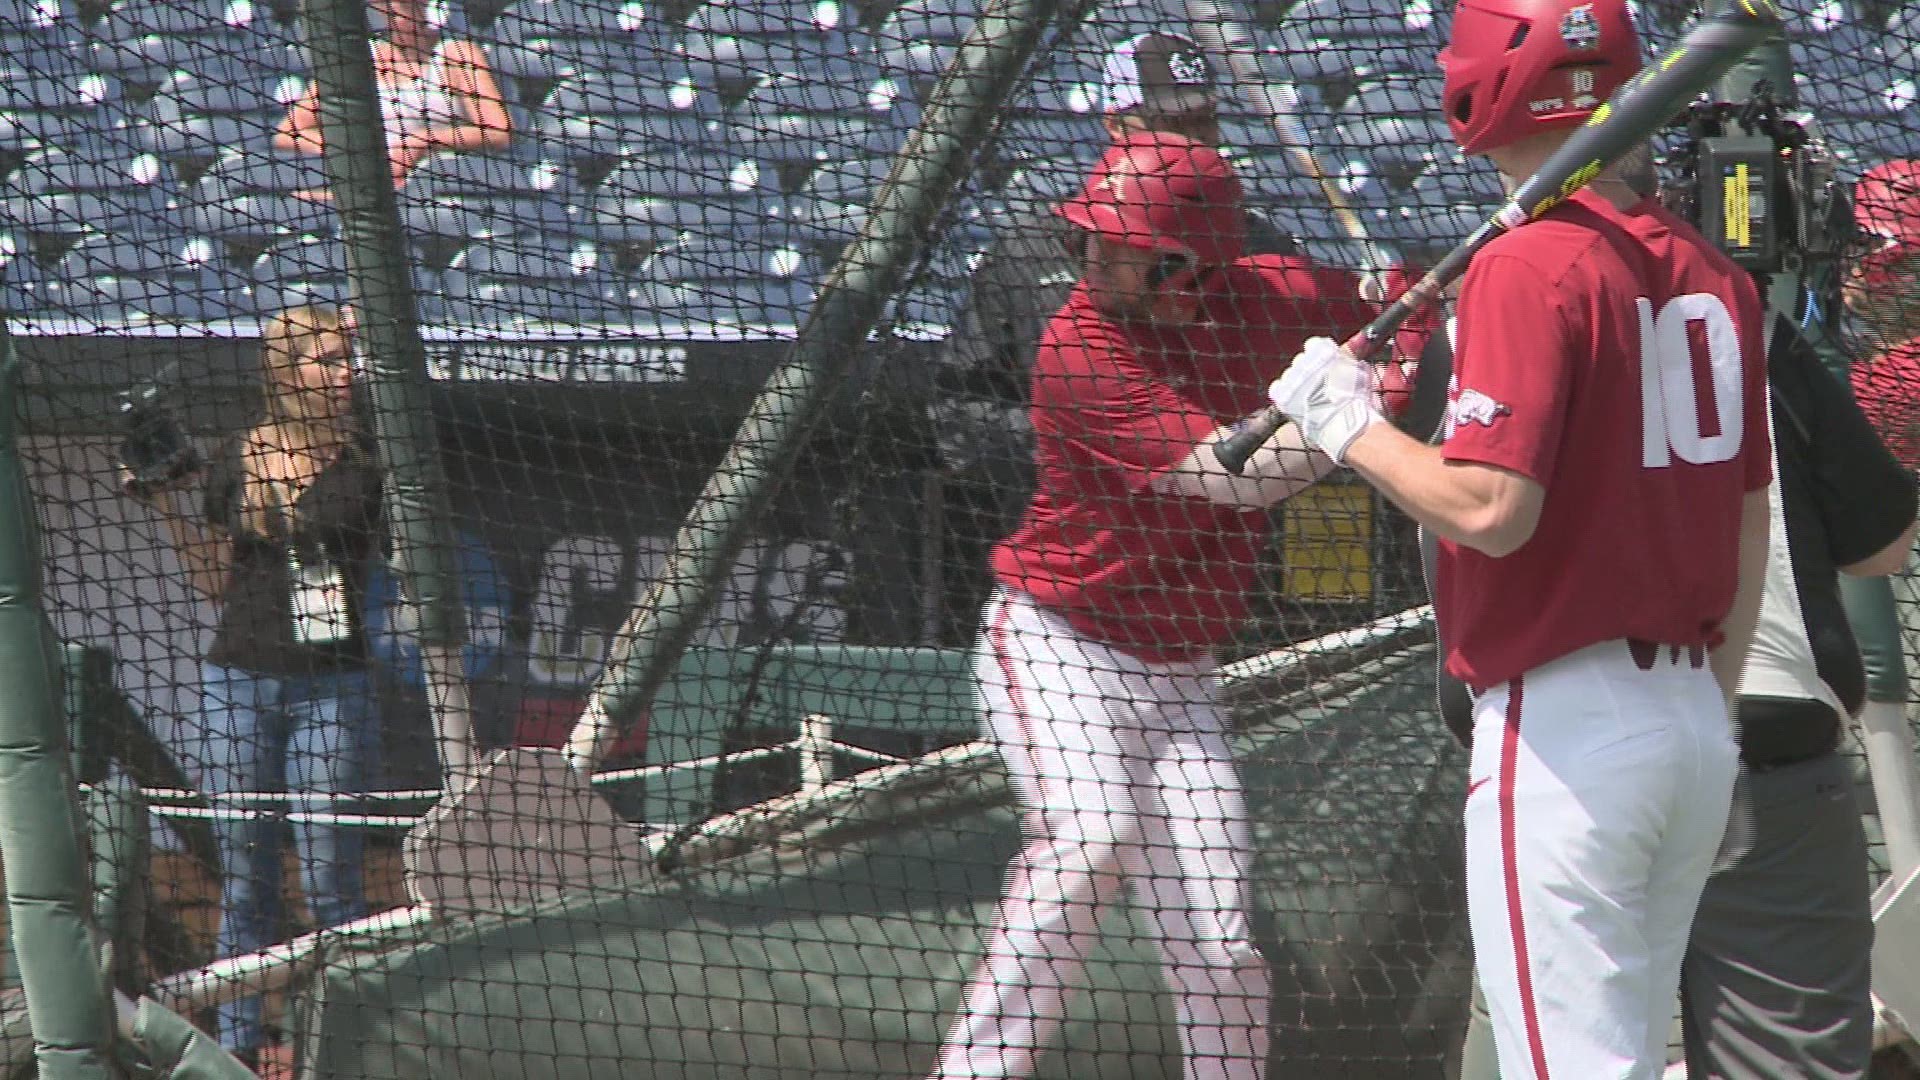 Arkansas had their final practice Friday before their opening game against Florida State